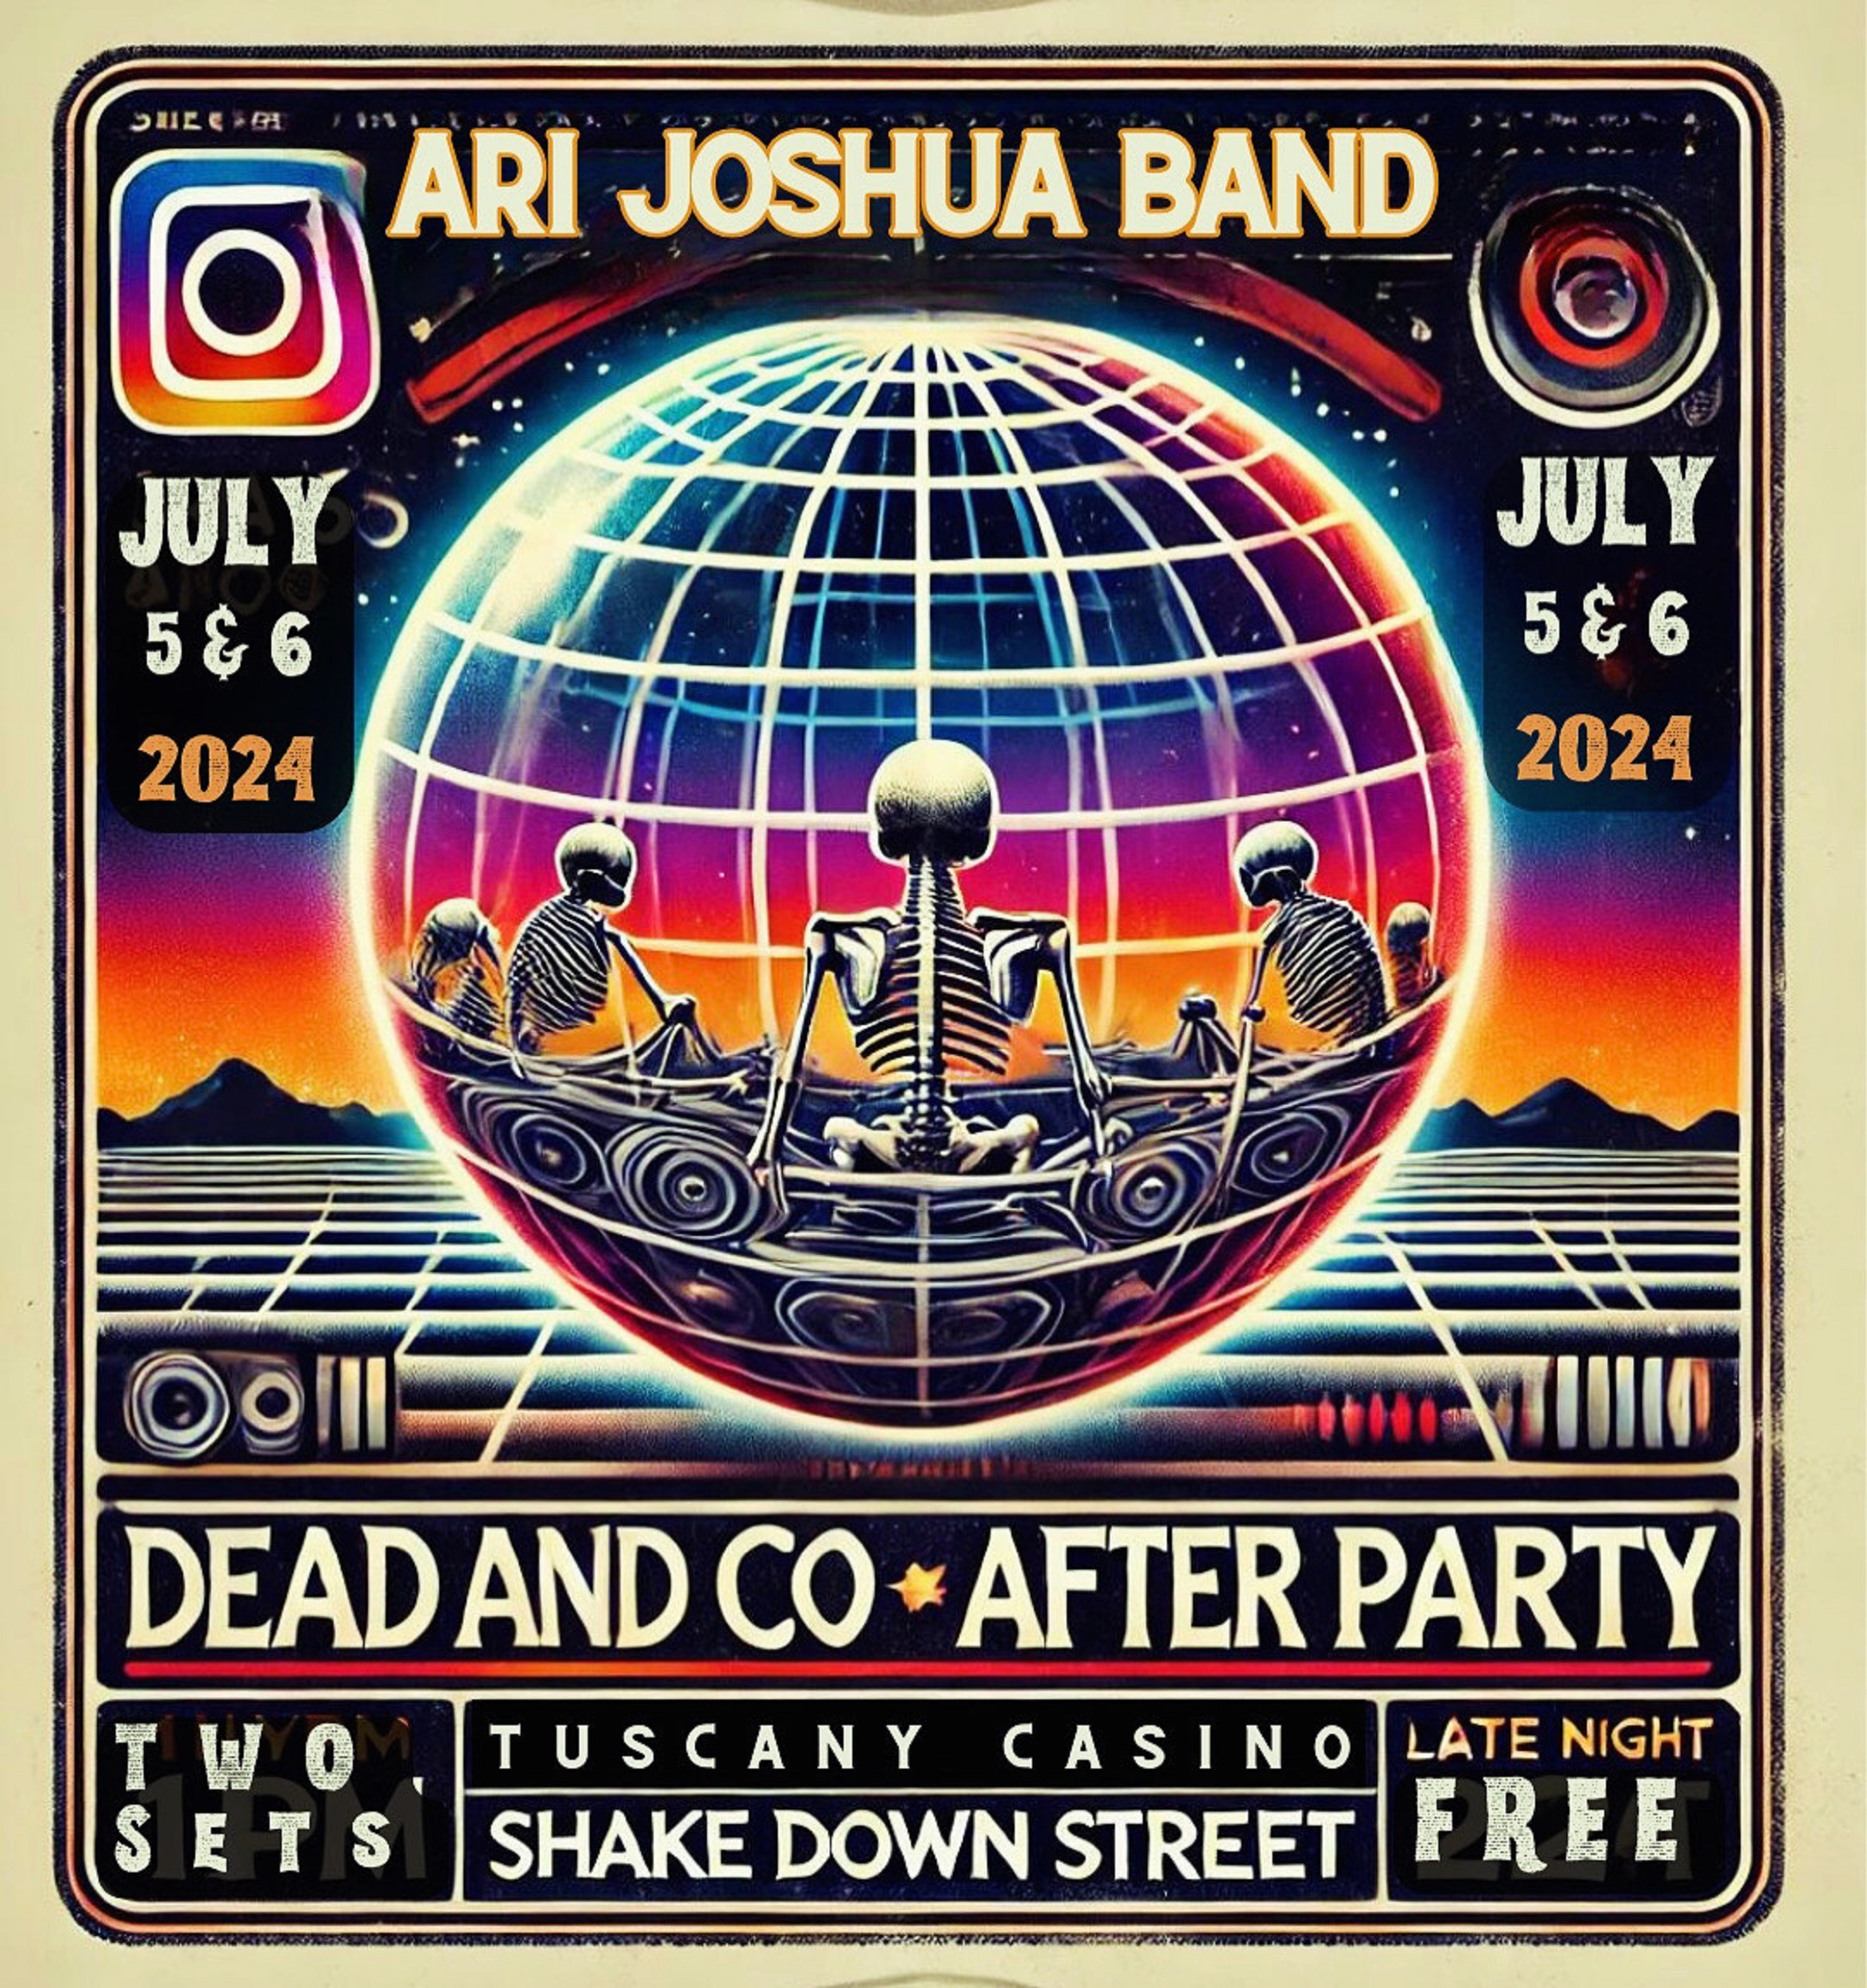 Ari Joshua Band to Perform at Las Vegas Dead & Co After-Party at The Copa Room, July 5th and 6th